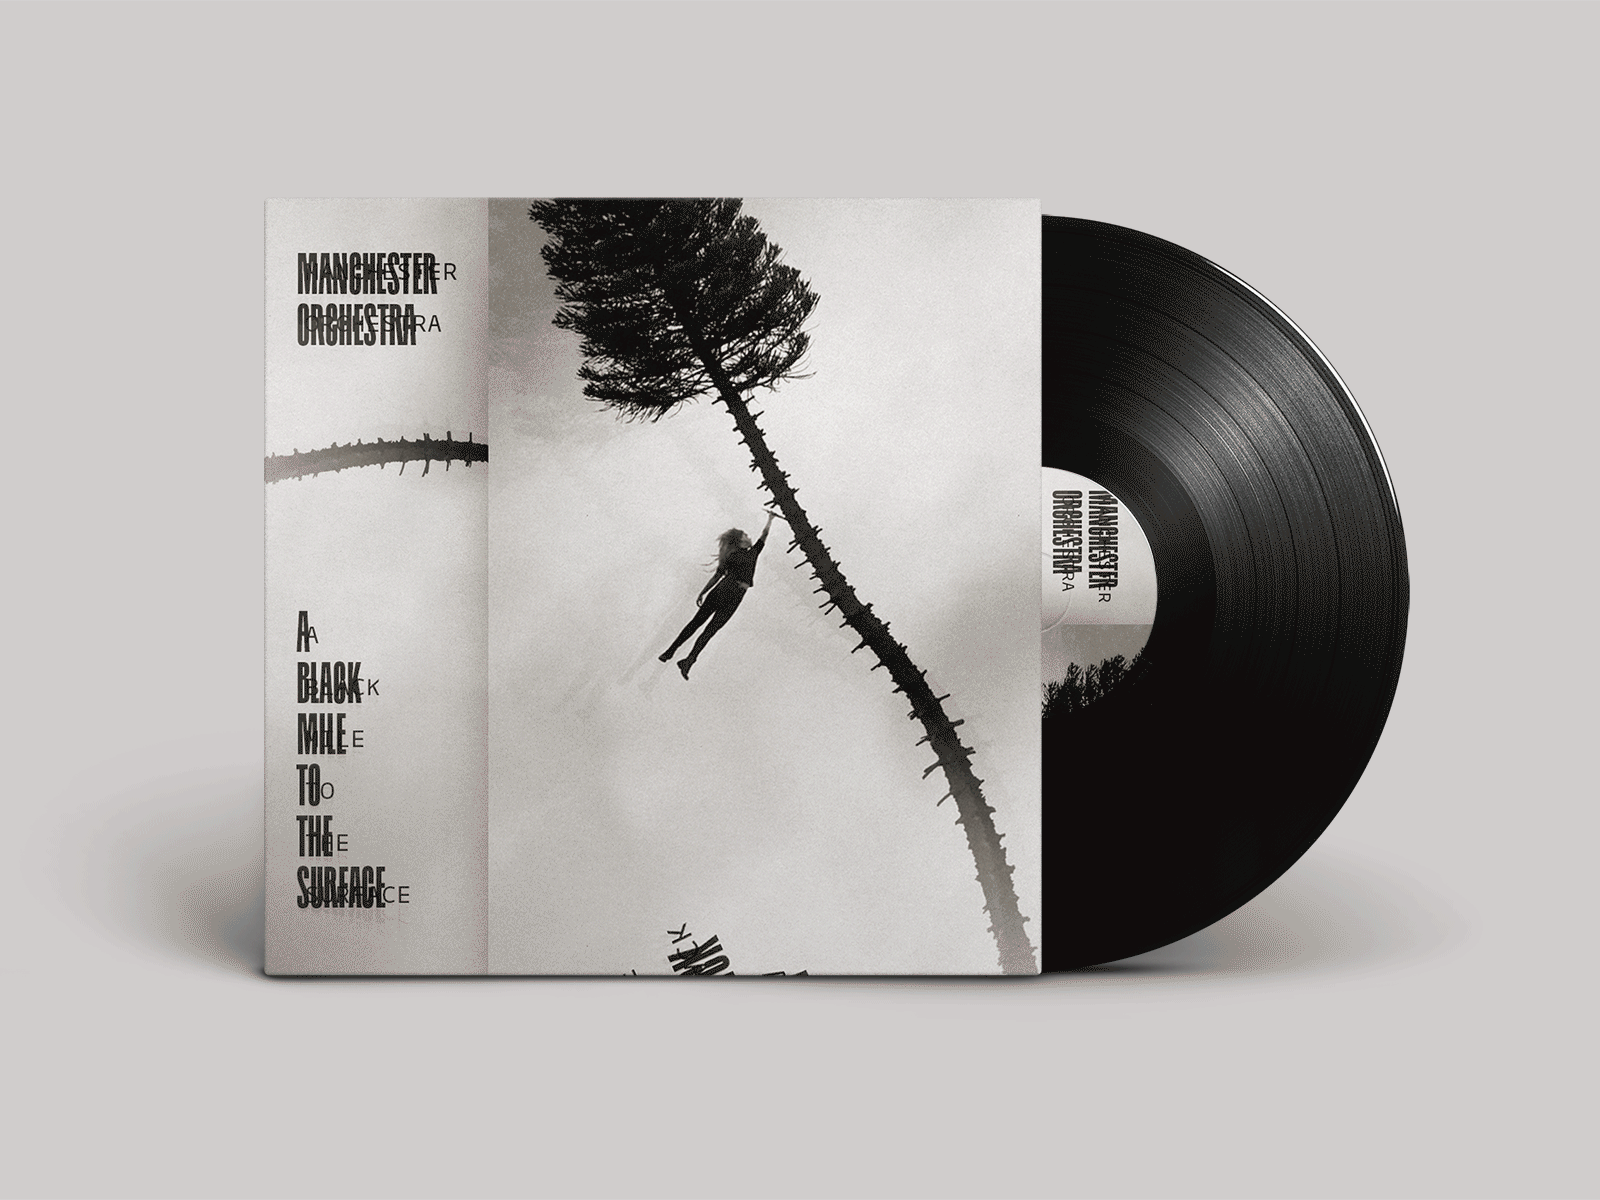 A Black Mile to the Surface by Manchester Orchestra album cover cover cover art cover design design dribbble dribbble best shot manchester orchestra mexico music record records rock and roll warm up warmup weekly warm up weeklywarmup